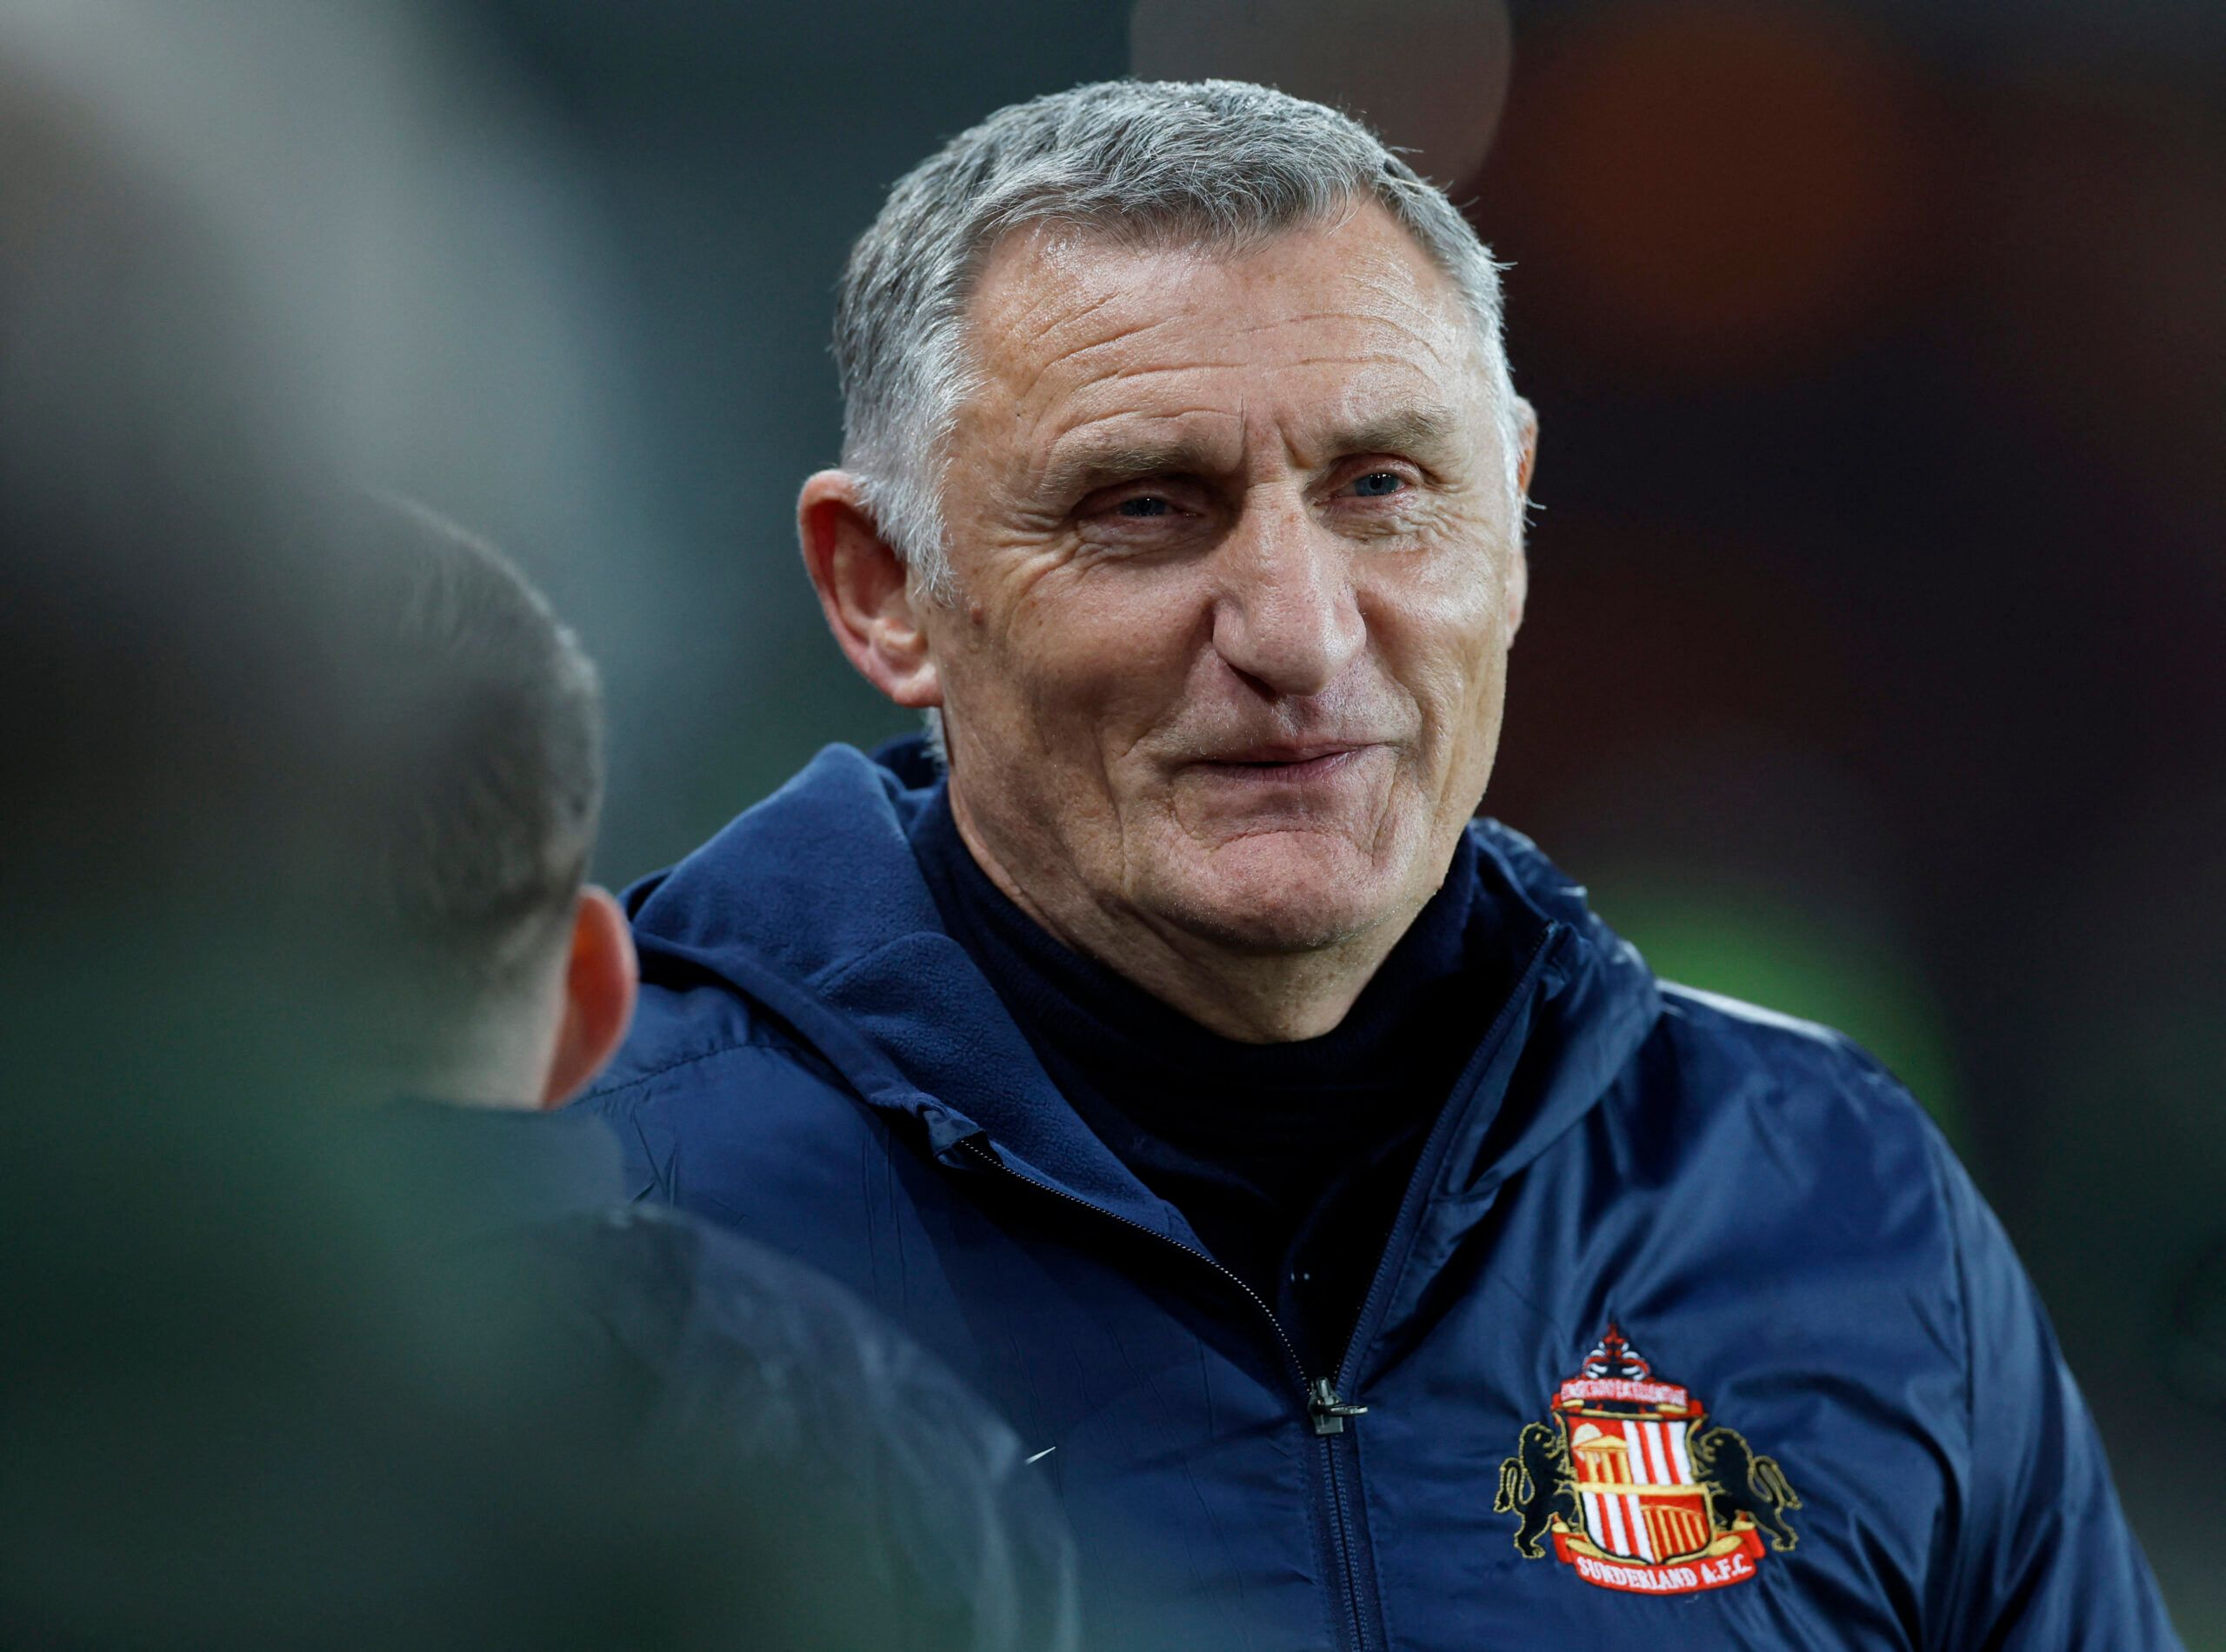 Soccer Football - Championship - Sunderland v West Bromwich Albion - Stadium of Light, Sunderland, Britain - December 12, 2022 Sunderland manager Tony Mowbray before the match Action Images/Jason Cairnduff EDITORIAL USE ONLY. No use with unauthorized audio, video, data, fixture lists, club/league logos or 'live' services. Online in-match use limited to 75 images, no video emulation. No use in betting, games or single club /league/player publications.  Please contact your account representative f